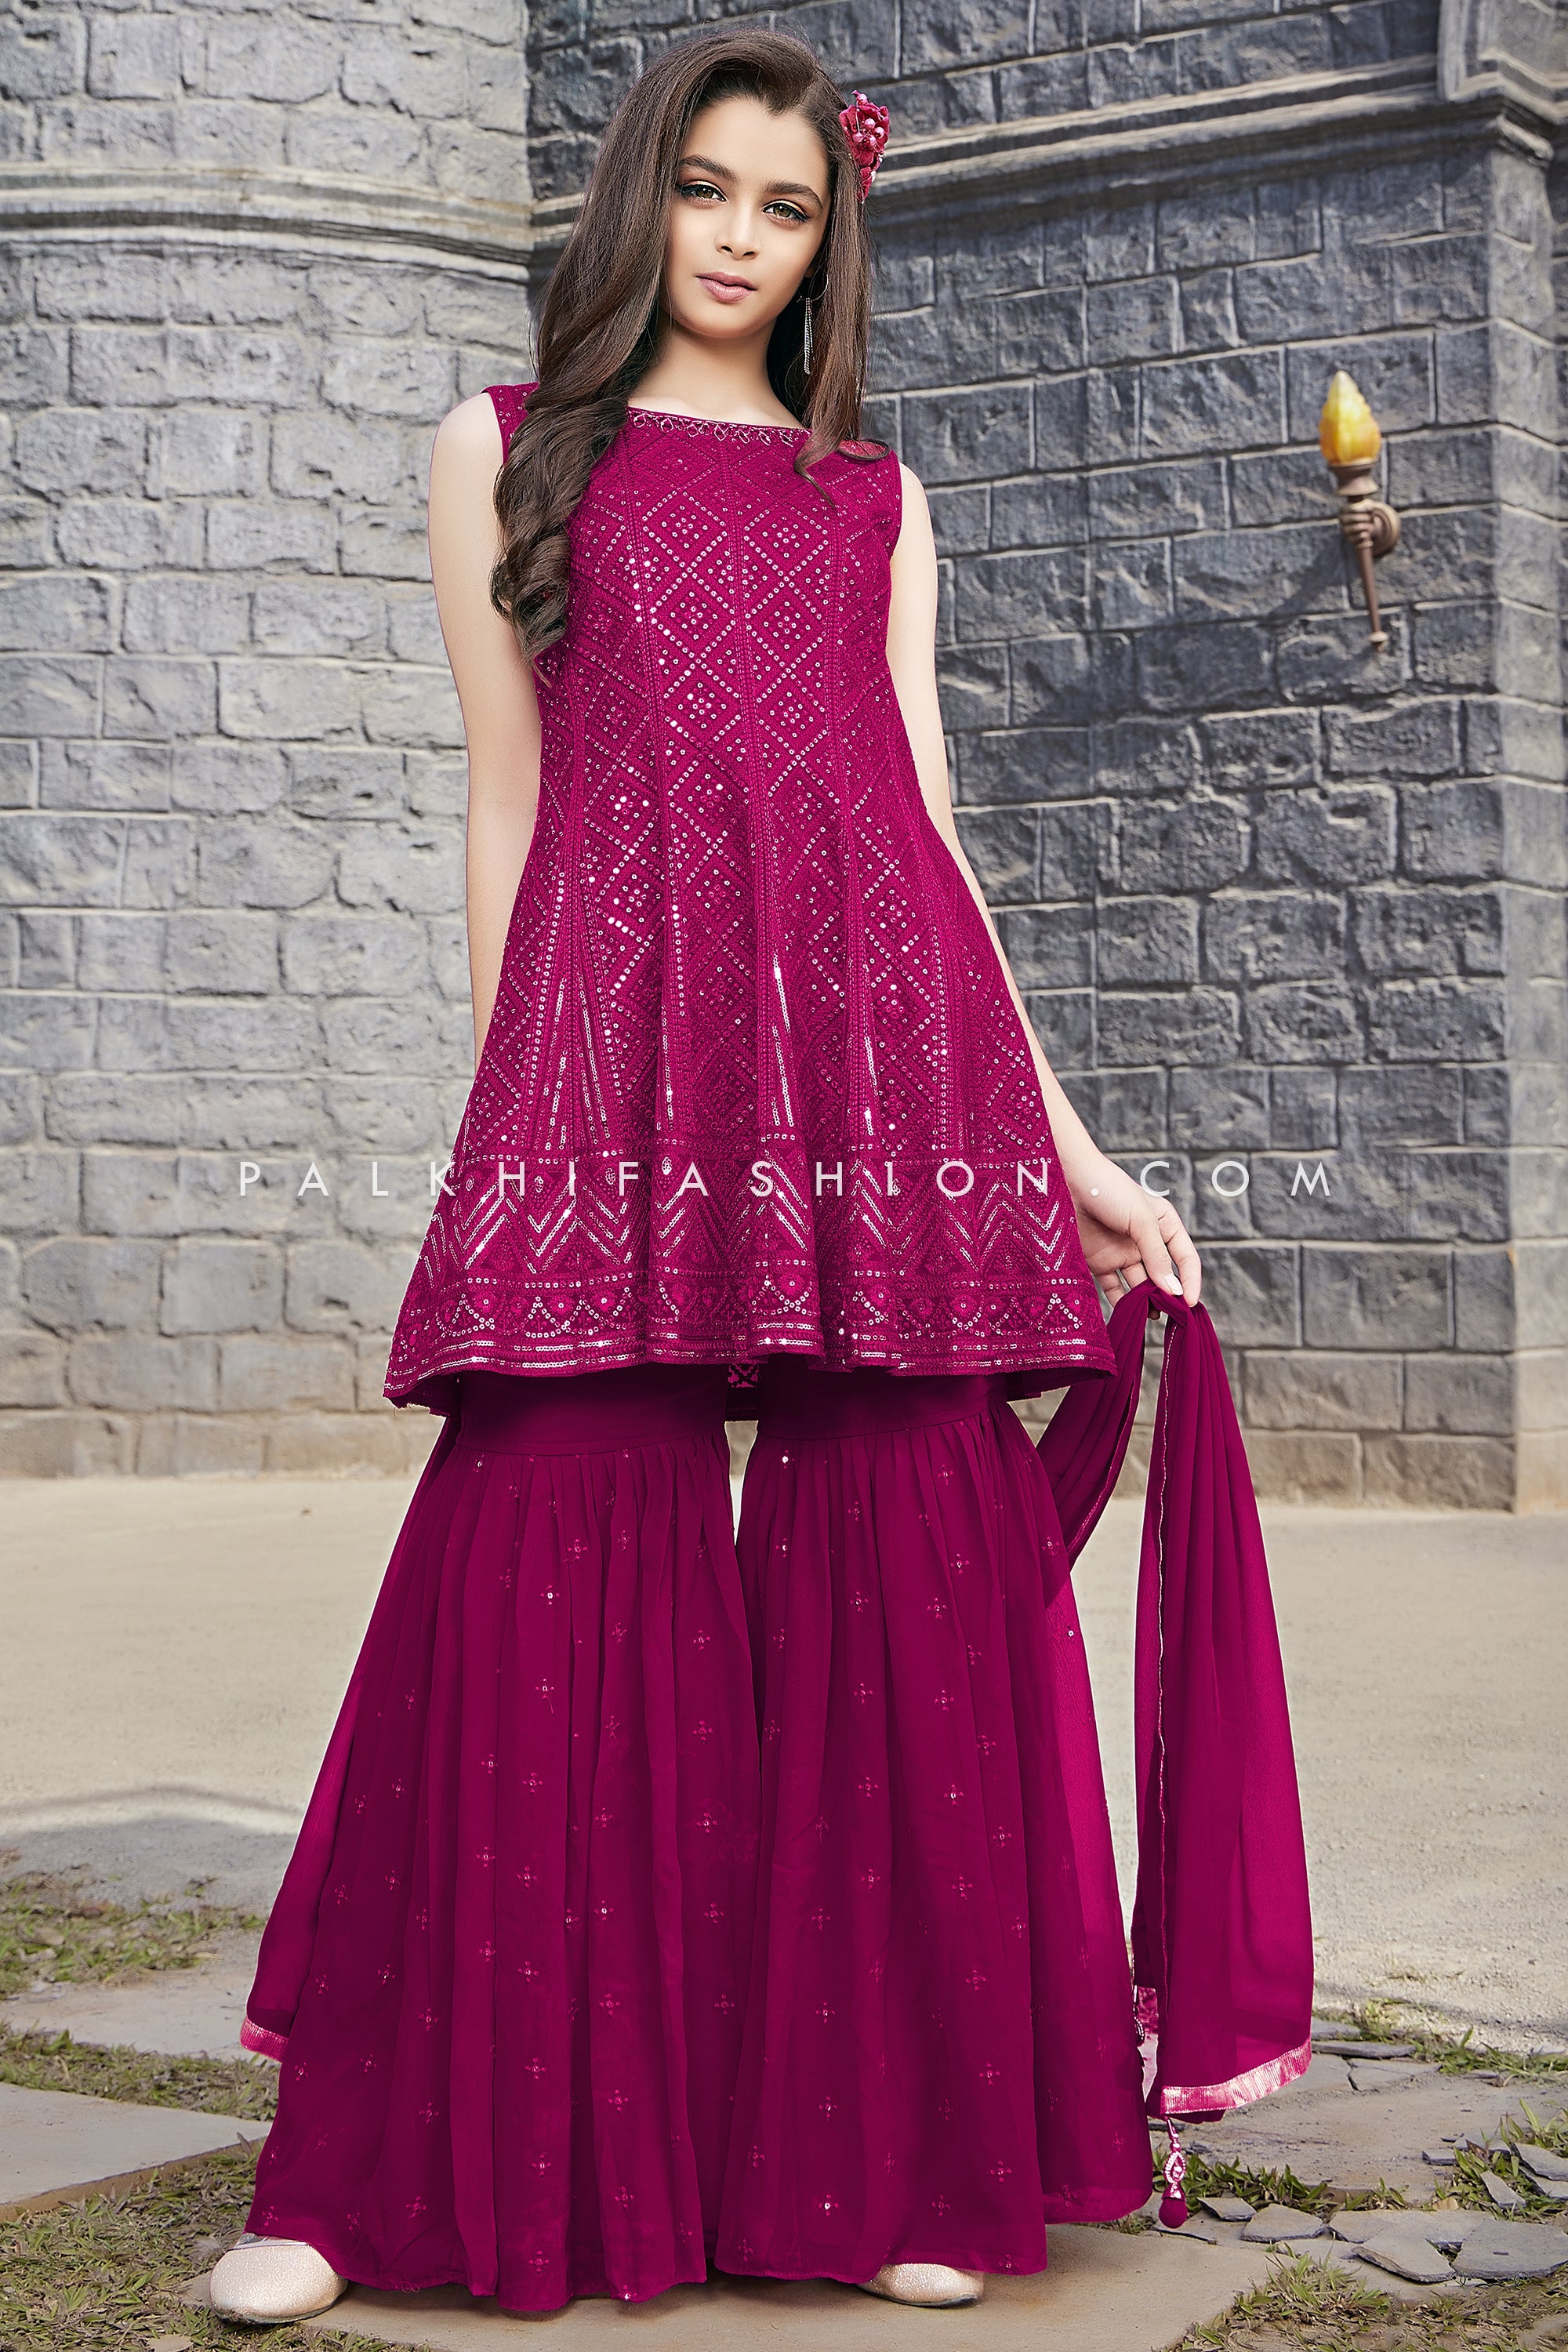 Palkhi Fashion | Indian Clothes Online in USA | Clothing Store Houston |  Beautiful dress designs, Designer party wear dresses, Stylish party dresses